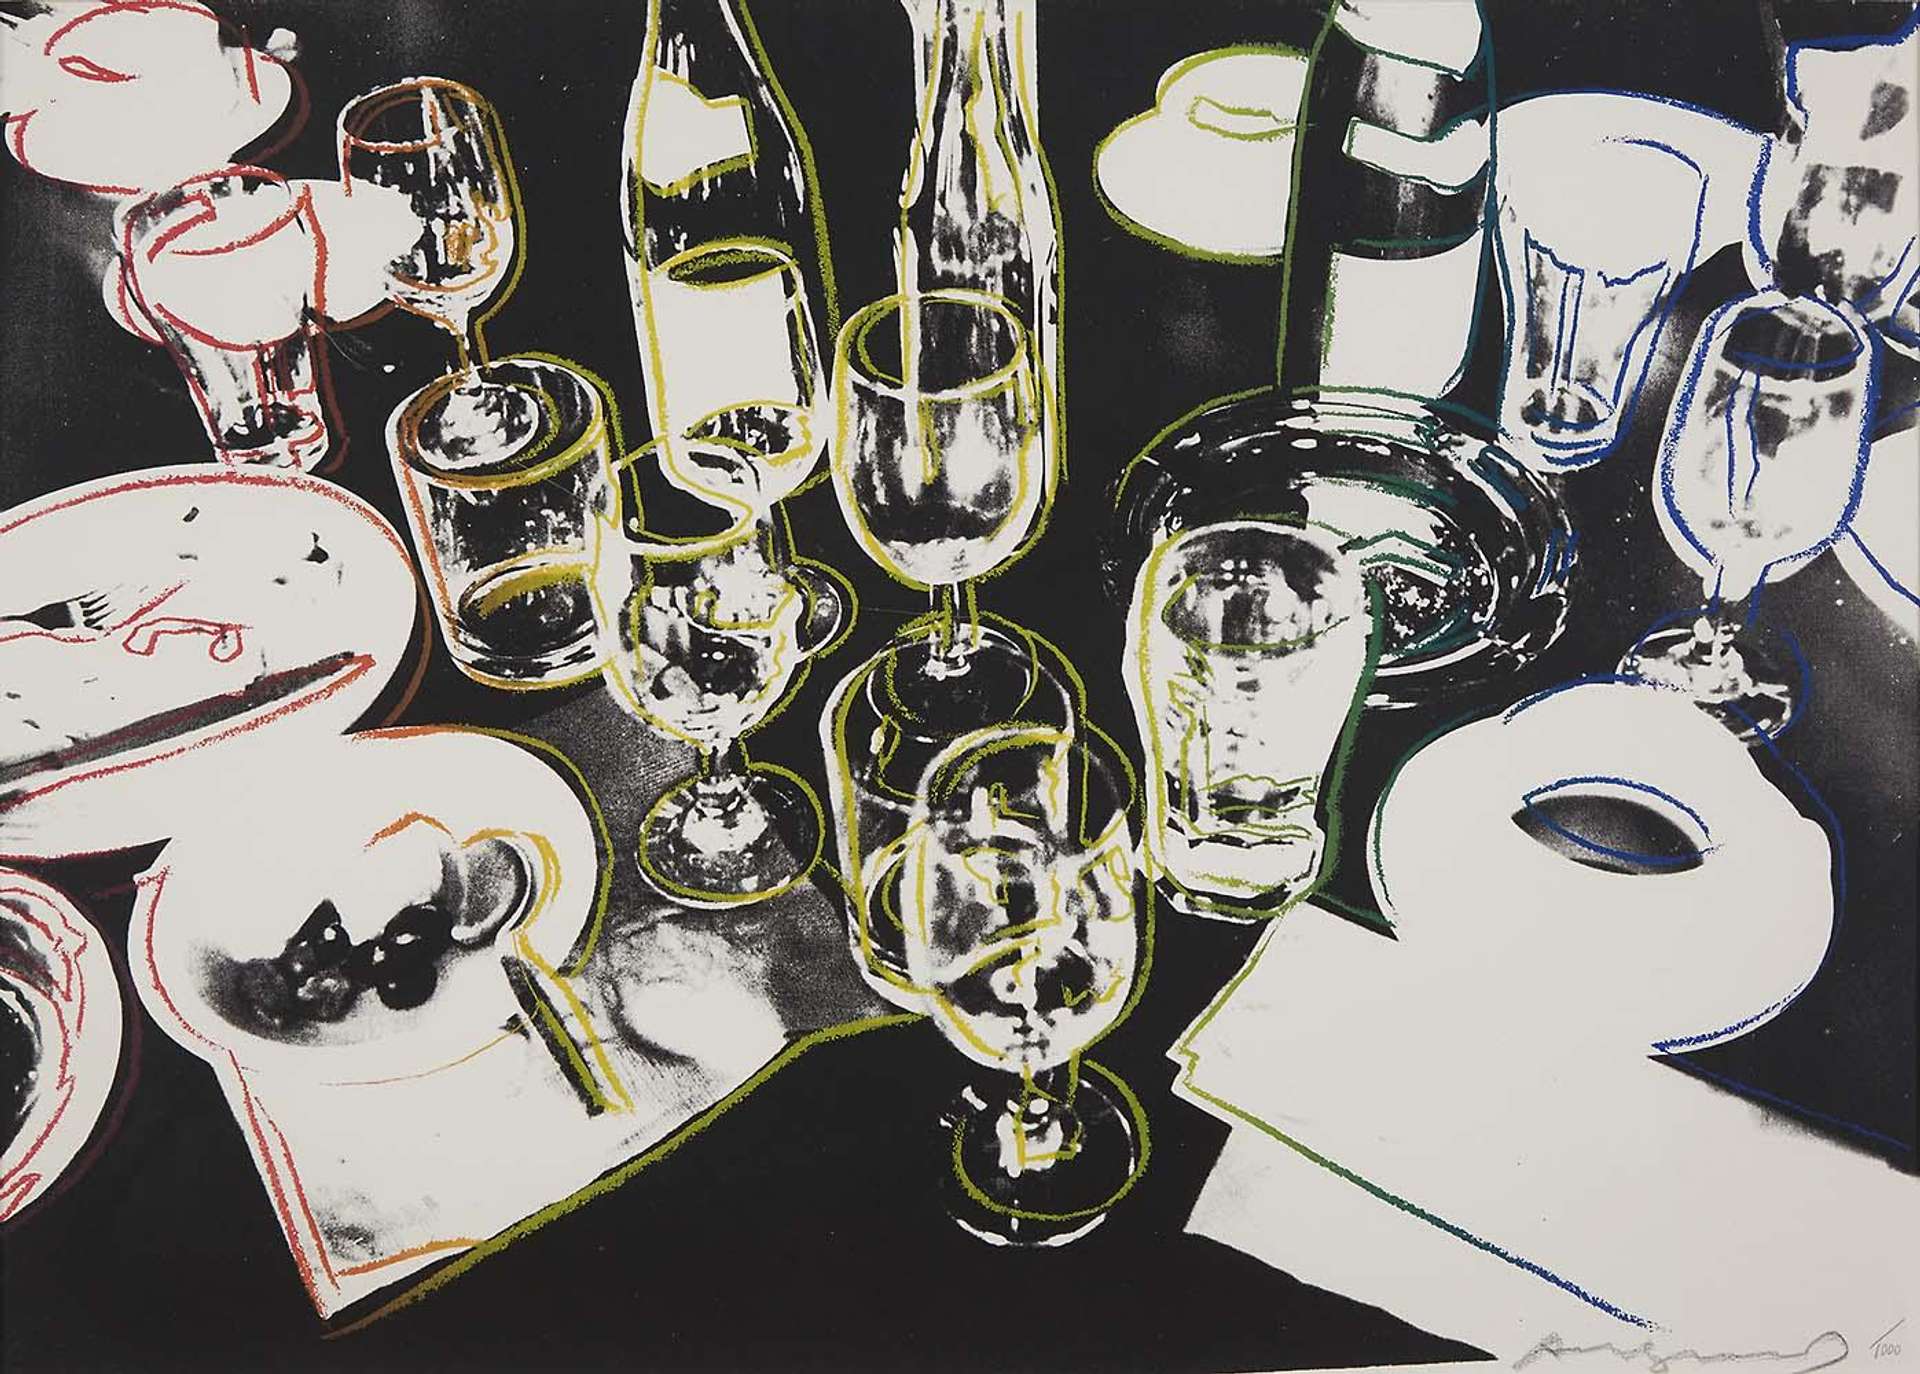 Printed in 1979, After The Party (F. & S. II.183) is a screen print by Andy Warhol that captures the aftermath of a seemingly wild and raucous party. A sense of gluttony and hedonism emerges from the haphazard arrangement of empty glasses, bottles and ashtrays that make up this print’s composition. The print is rendered in monochromatic black and white with vivid tints of red, yellow and blue outlining the various objects that are spread across the table.